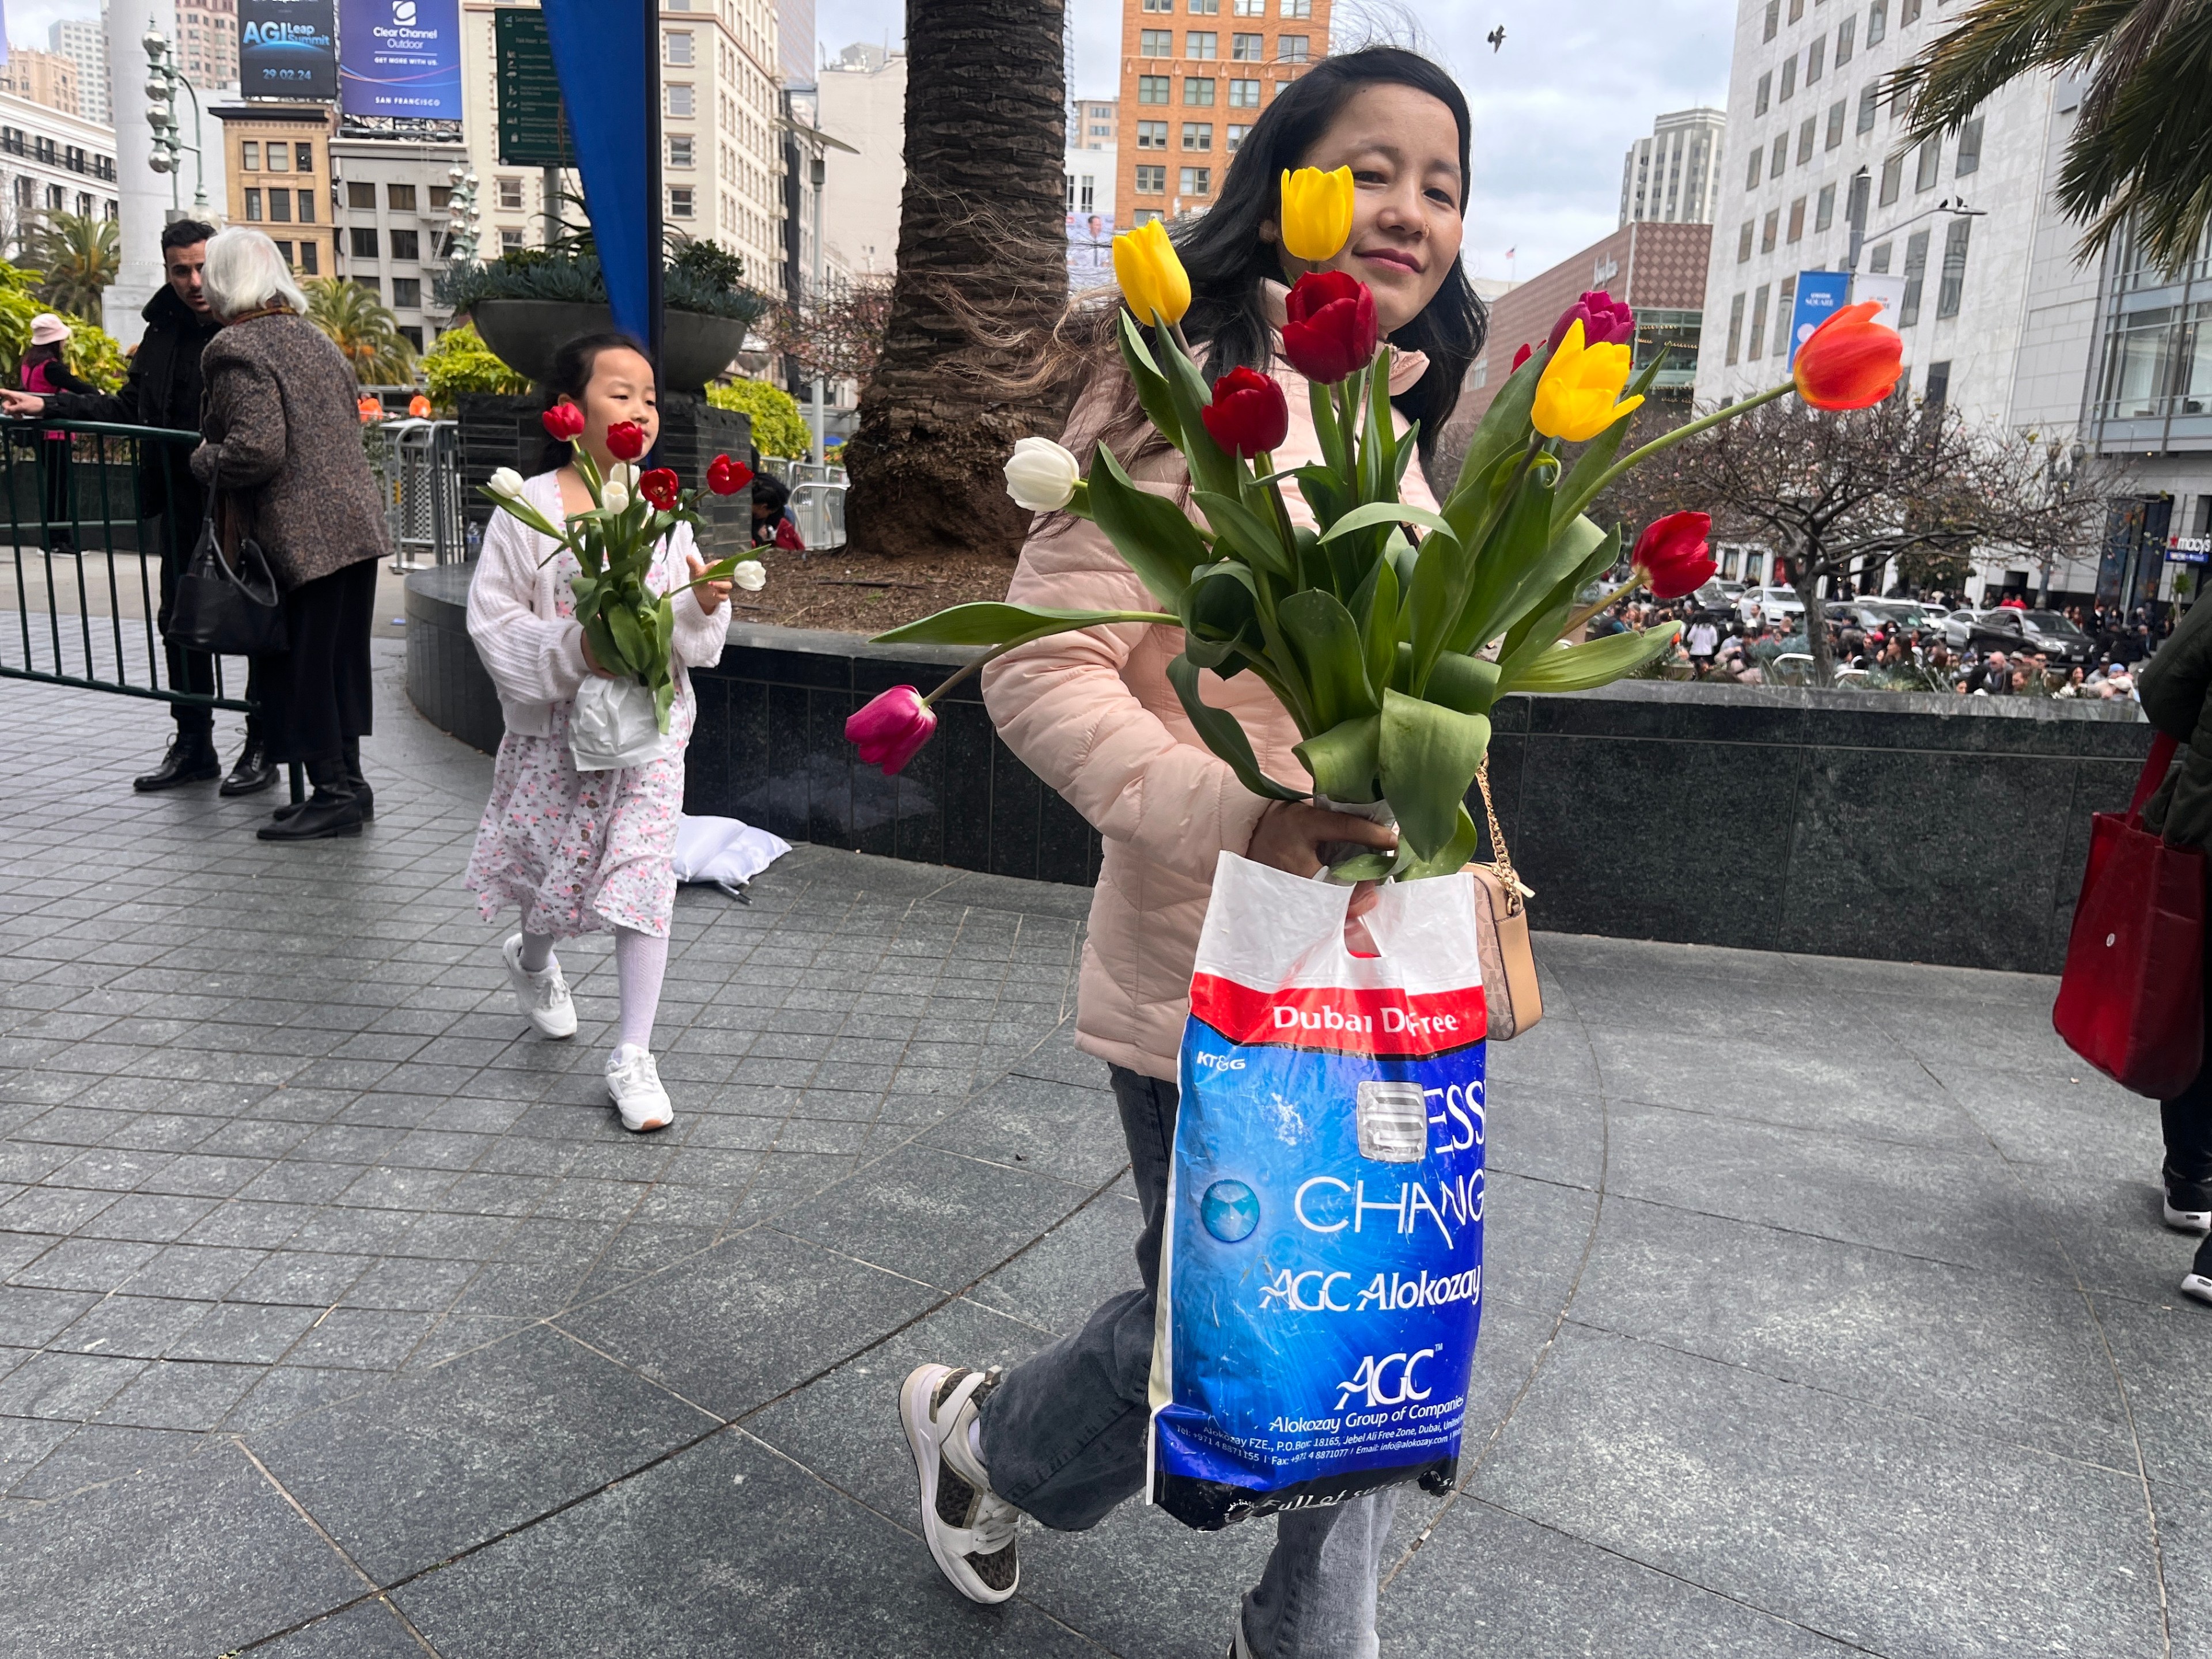 A woman holding colorful tulips in a plastic bag walks by a girl, both smiling, in an urban square.